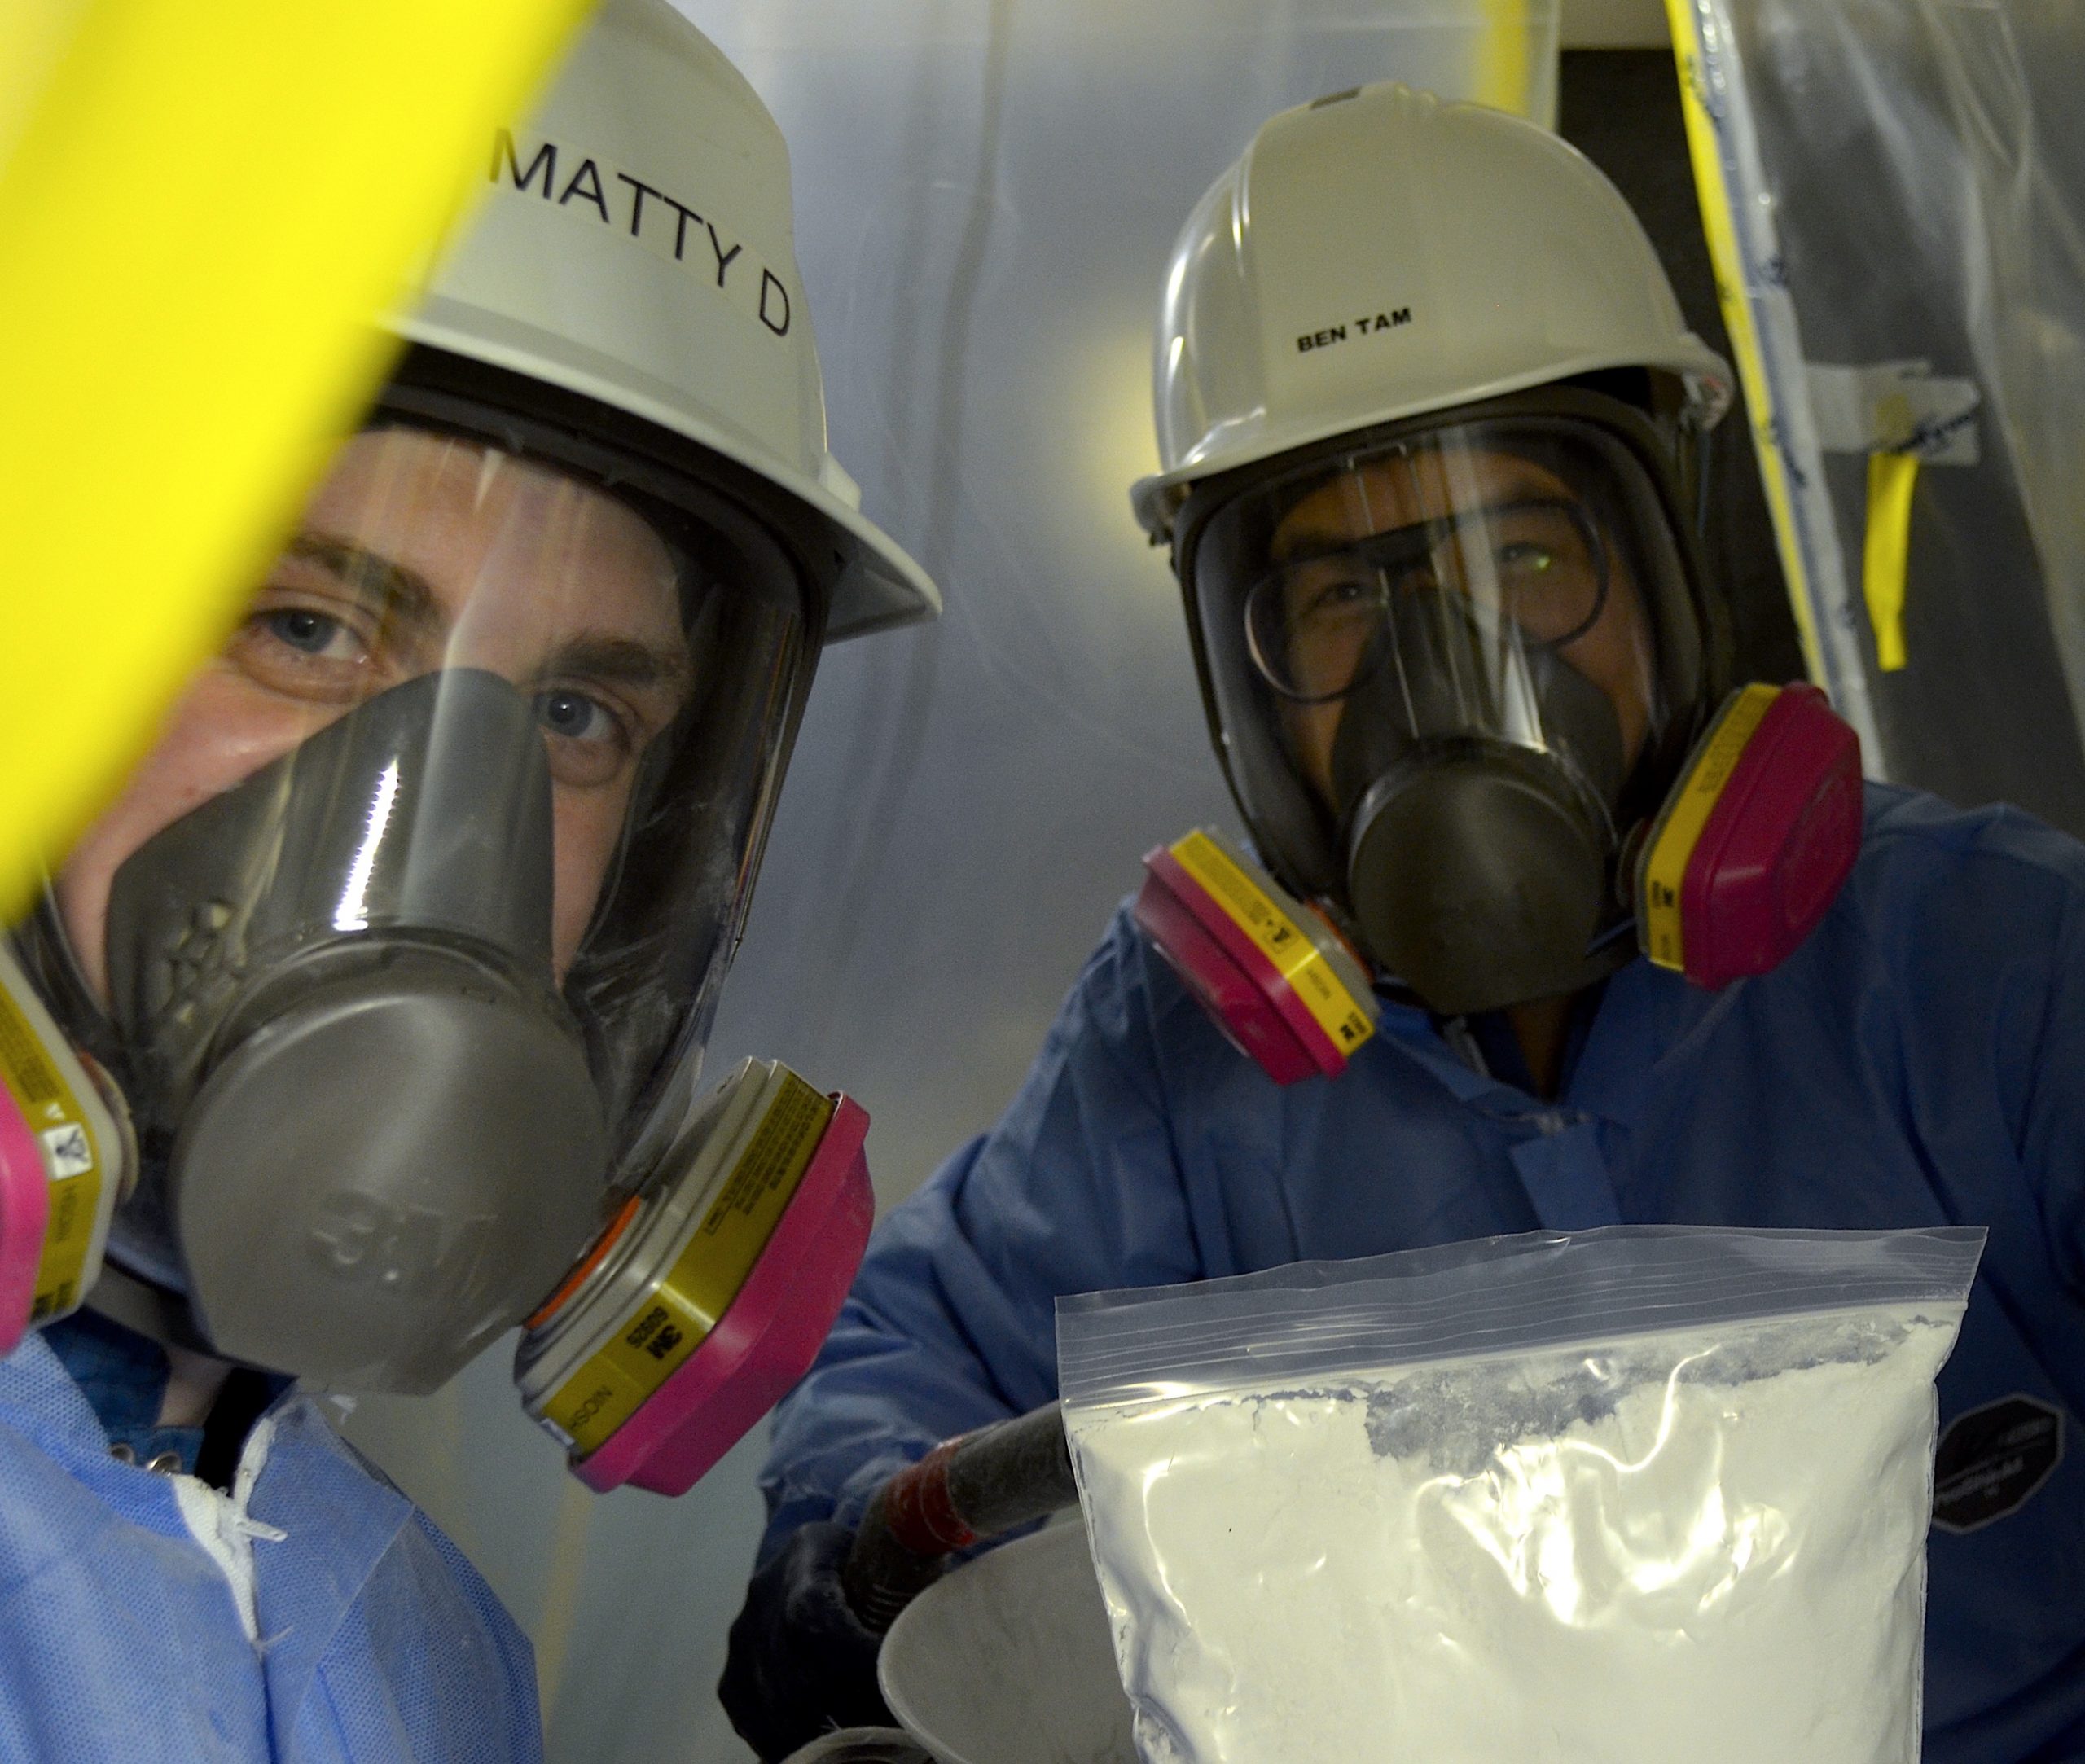 Two people in full personal protective equipment (jumpsuits, gas masks with face shields, hard hats, gloves) are in a compact space. They are smiling while one person holds a large plastic baggie of white powder.